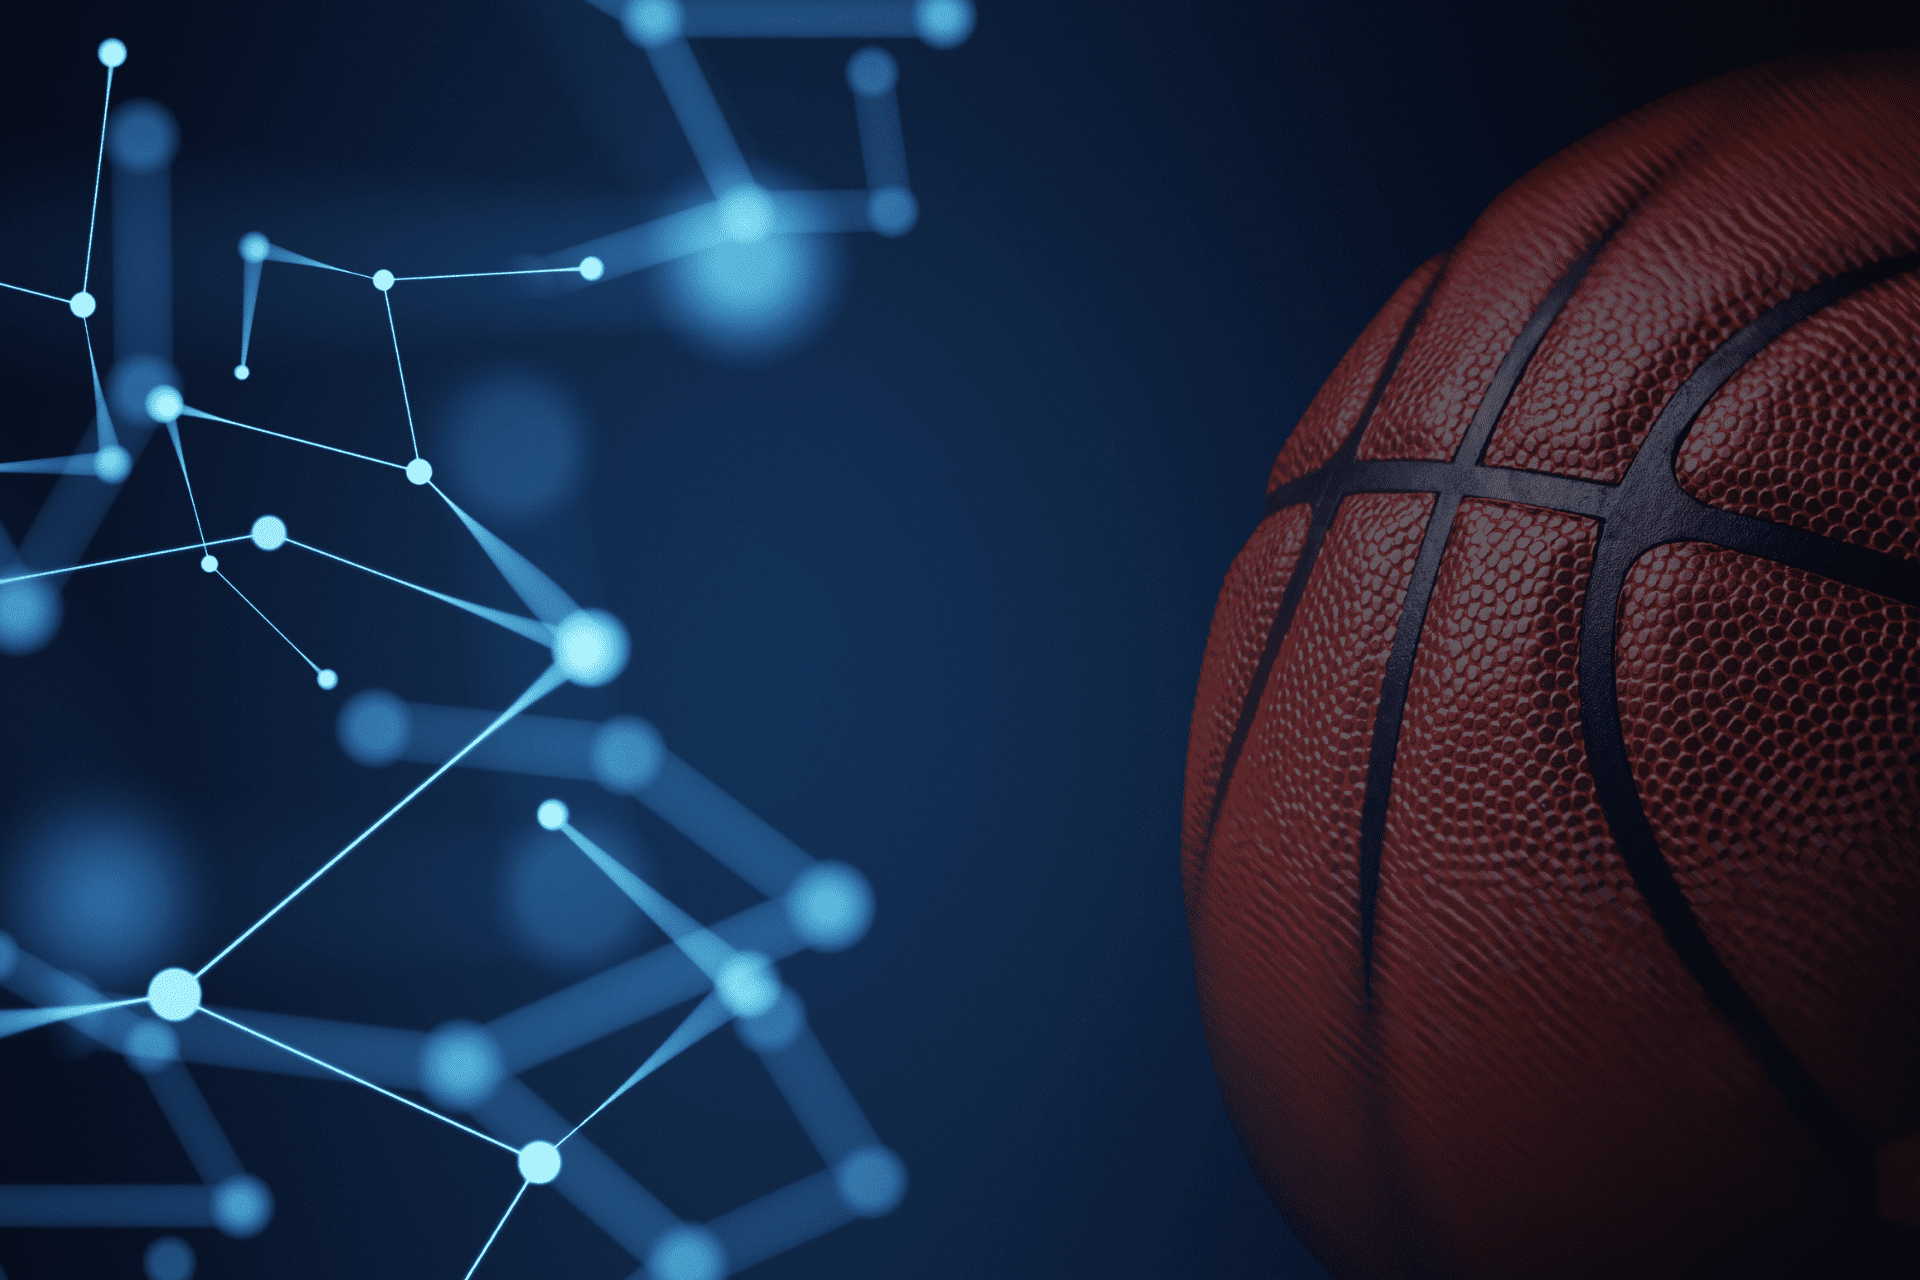 An image showing a basketball and technology highlighting CLDigital's software's power to accurately predict NBA draft picks, based on data.